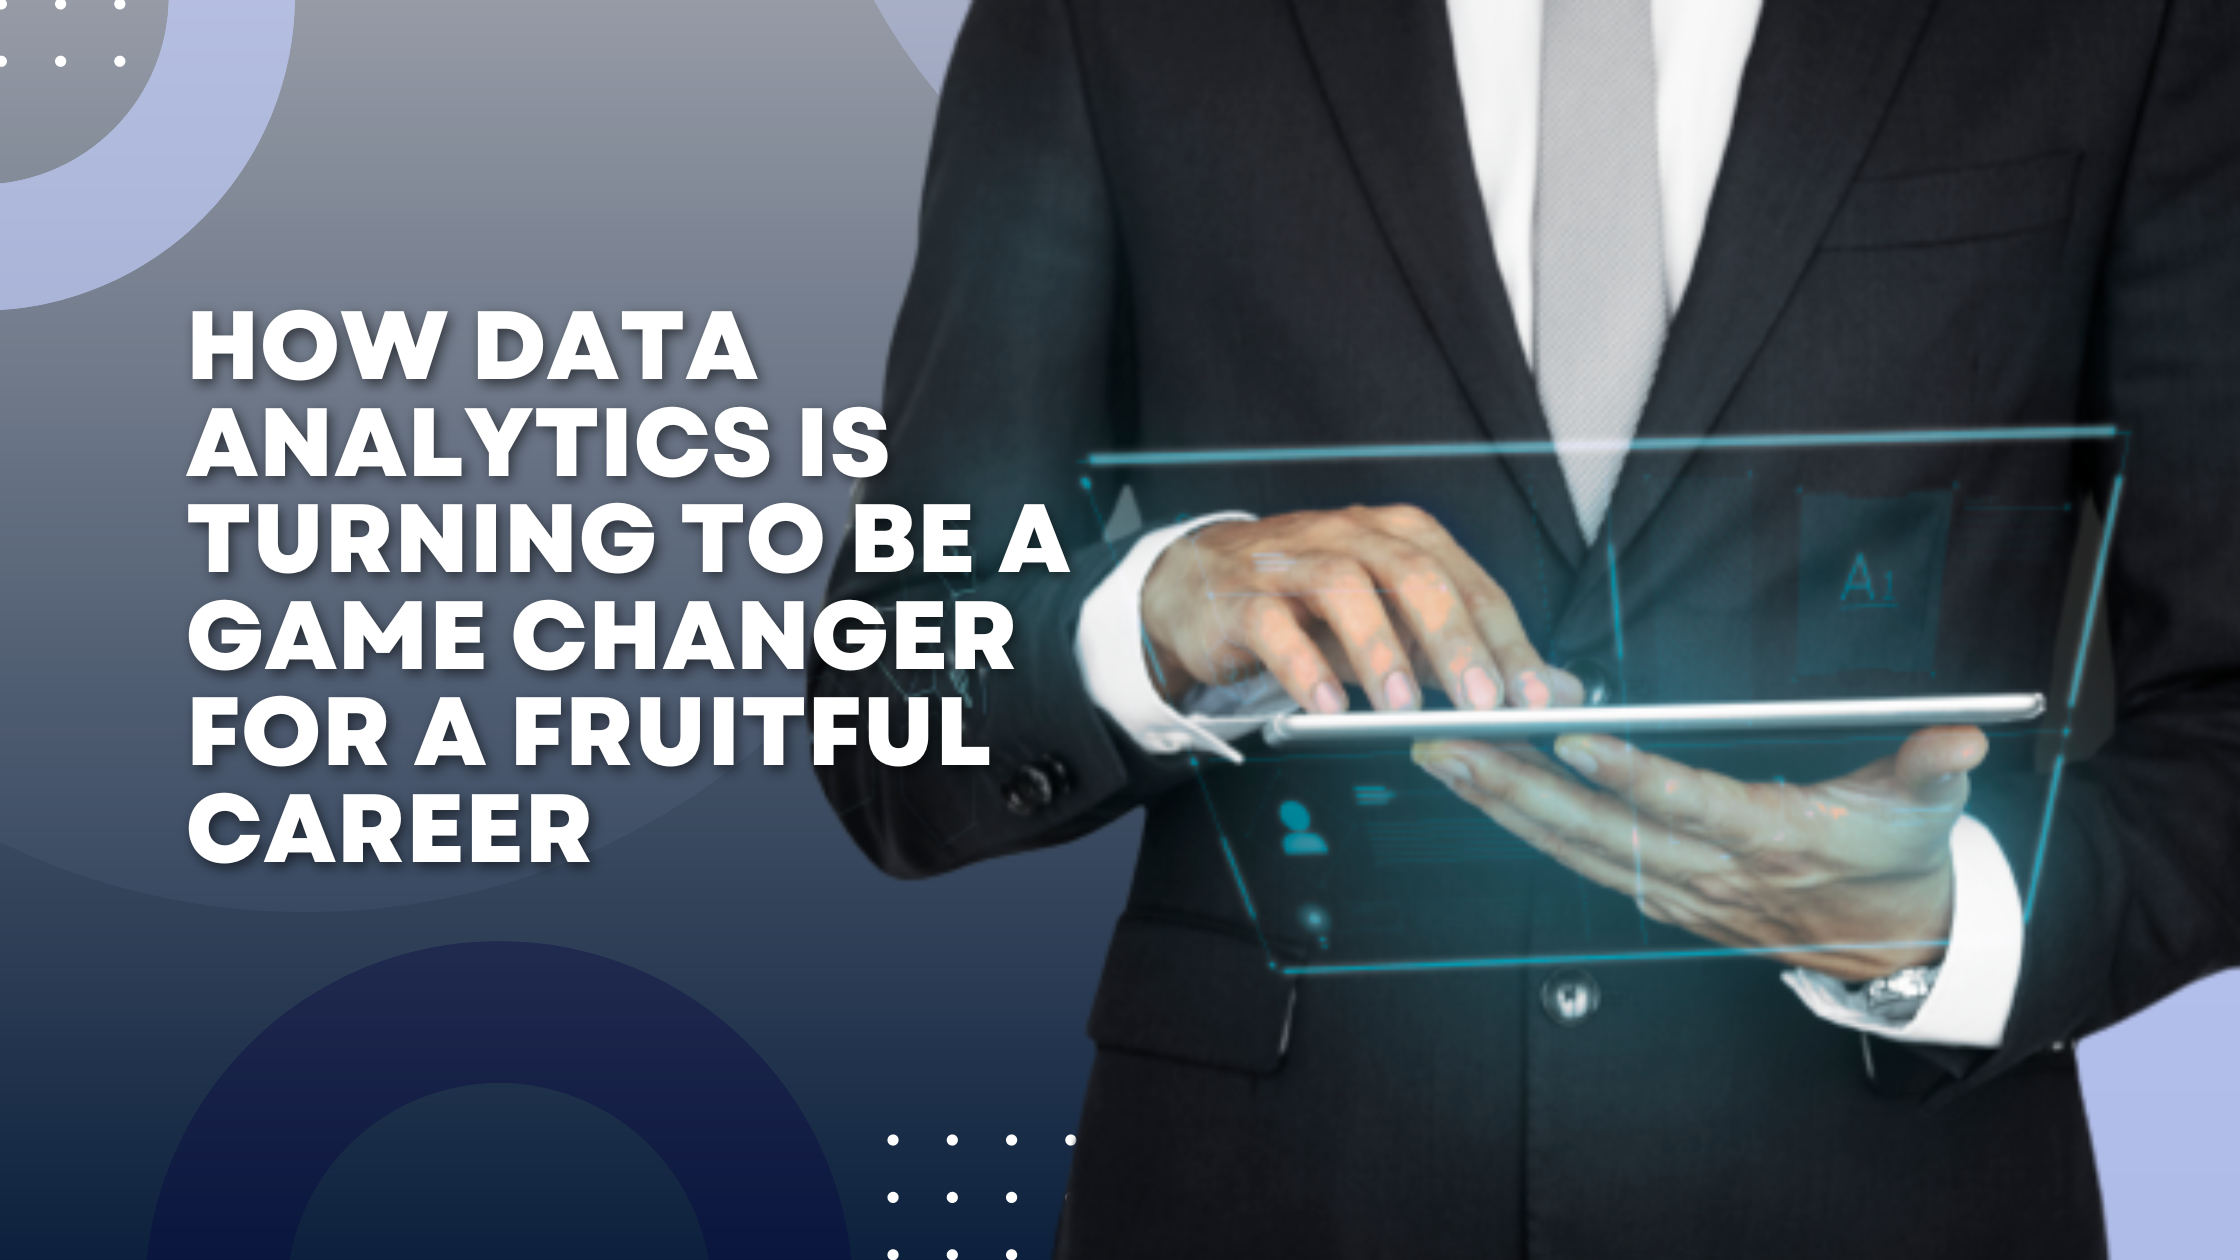 How Data Analytics is turning to be a Game Changer for a Fruitful Career